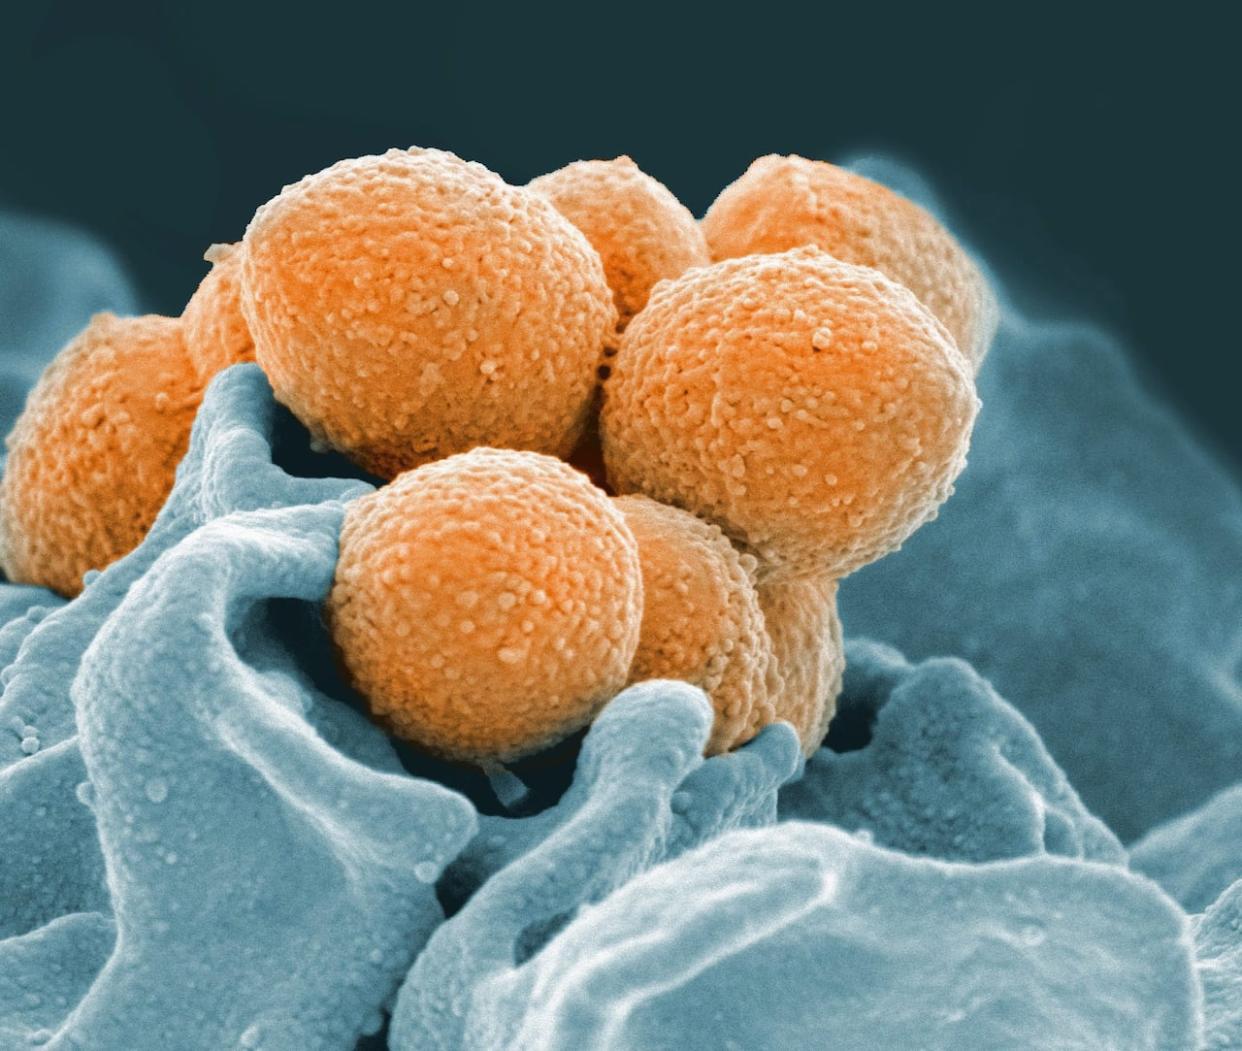 An electron microscope image shows group A streptococcus bacteria. Strep A was detected in four child deaths over the last month, according to B.C. health authorities. (National Institute of Allergy and Infectious Diseases/The Associated Press - image credit)